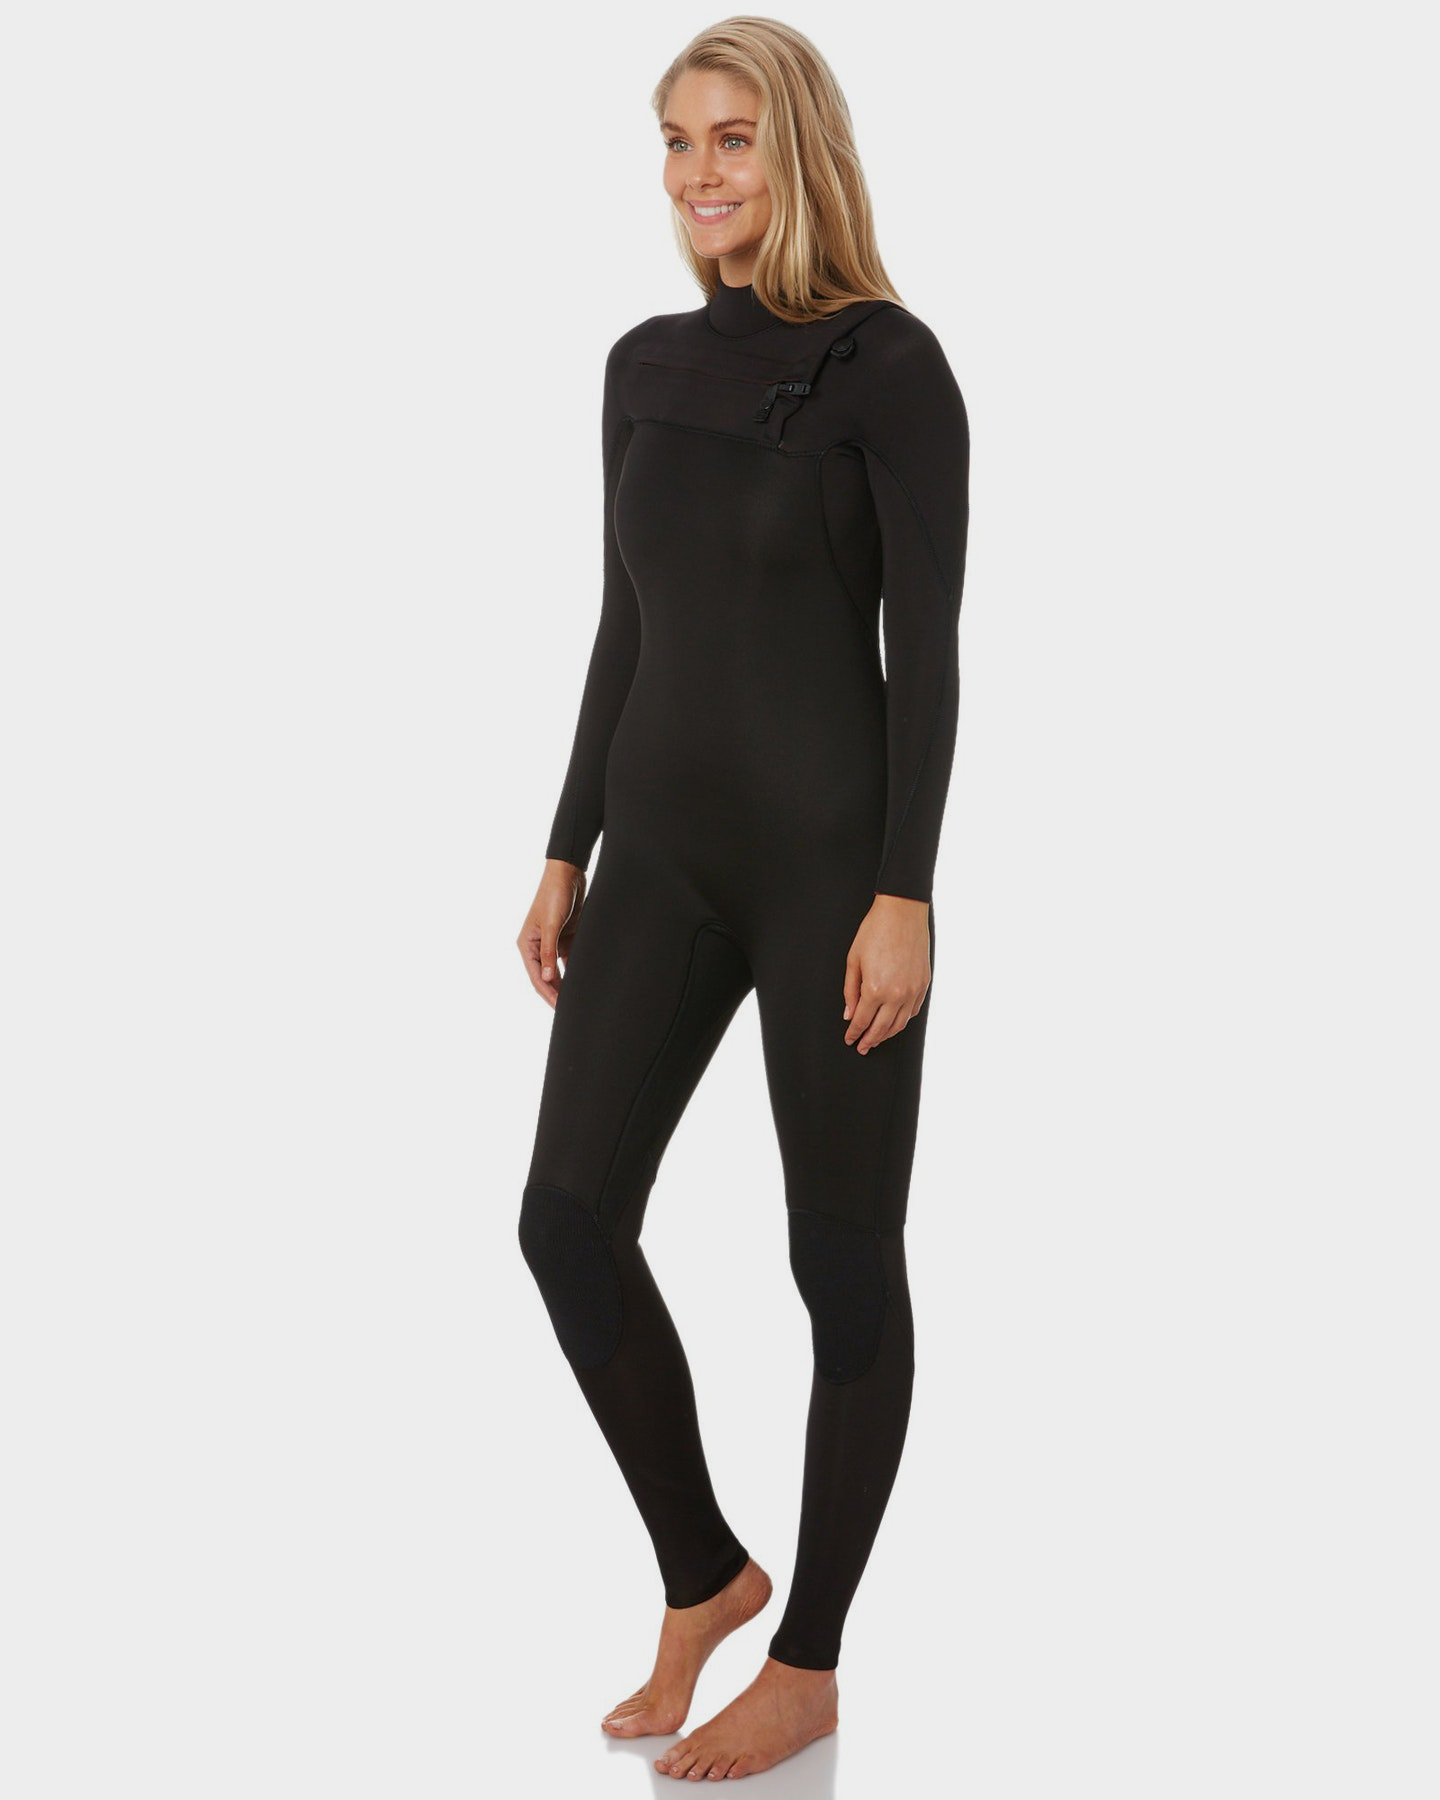 Project Blank Womens 3/2 High Performance Wetsuit - Black | SurfStitch